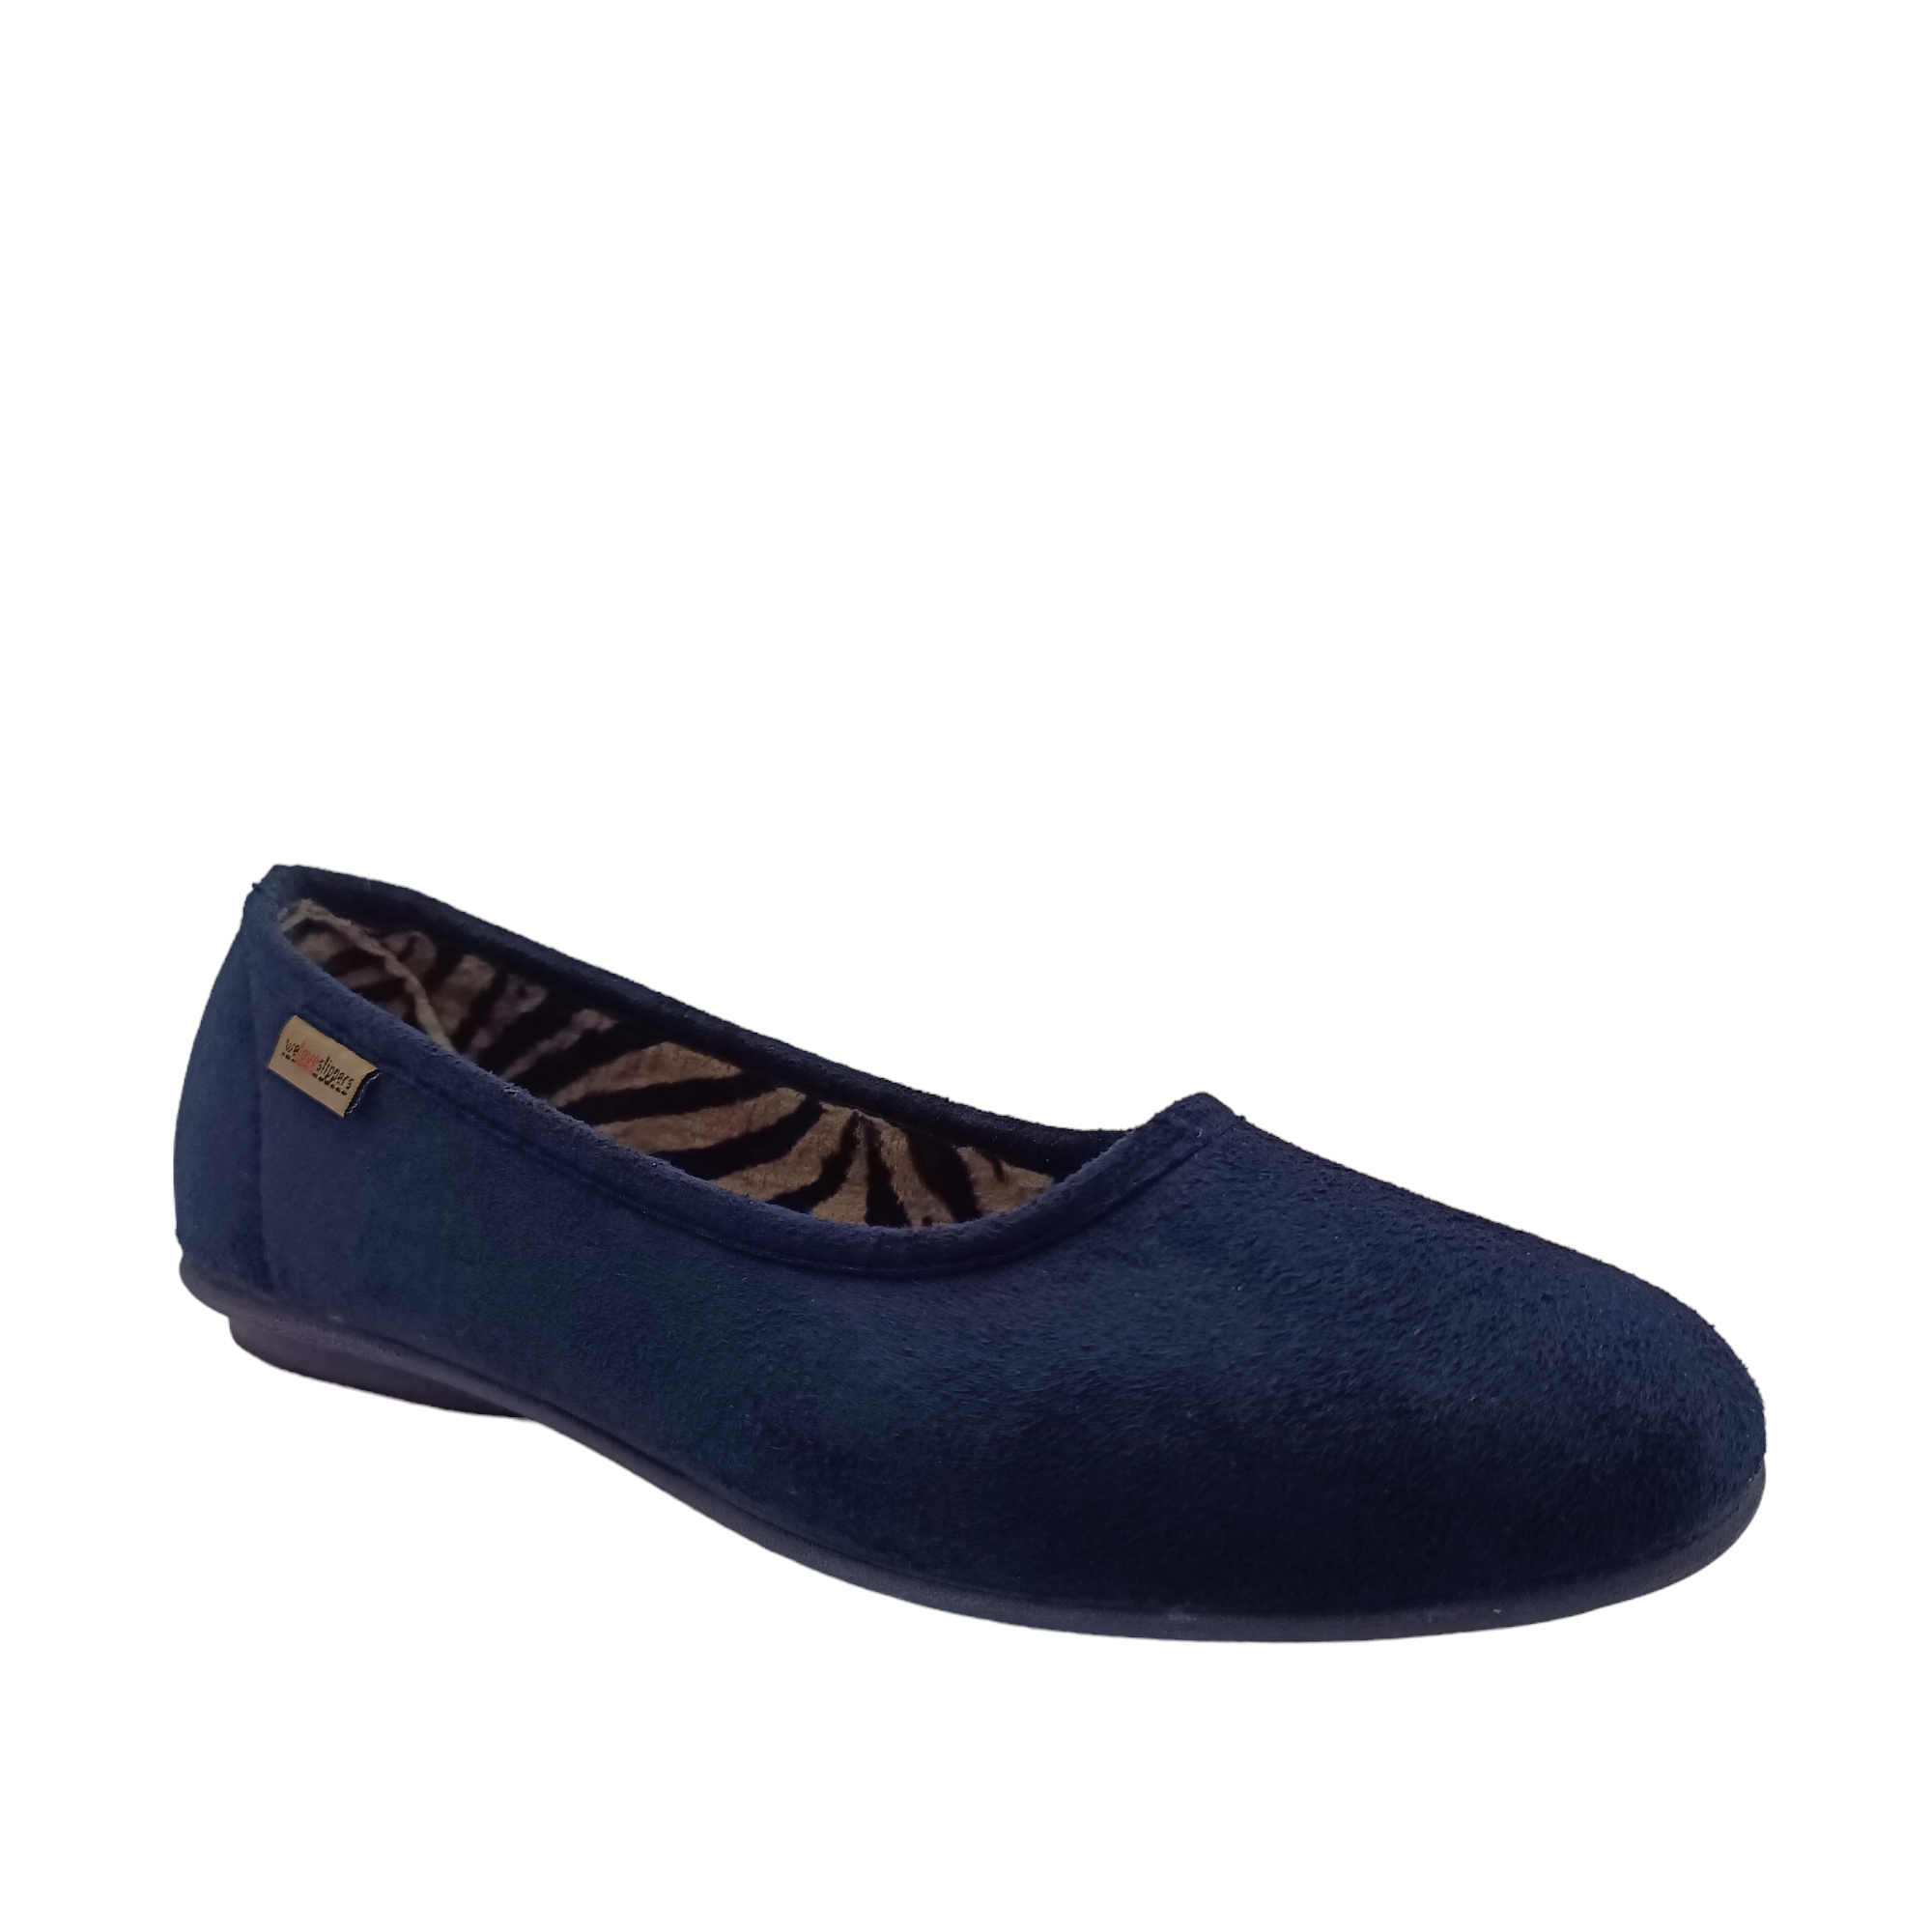 Front view of navy Nuzzle Slippers with leopard print lining. Shop Womens Slippers and Shoes Online and In-store with shoe&me.